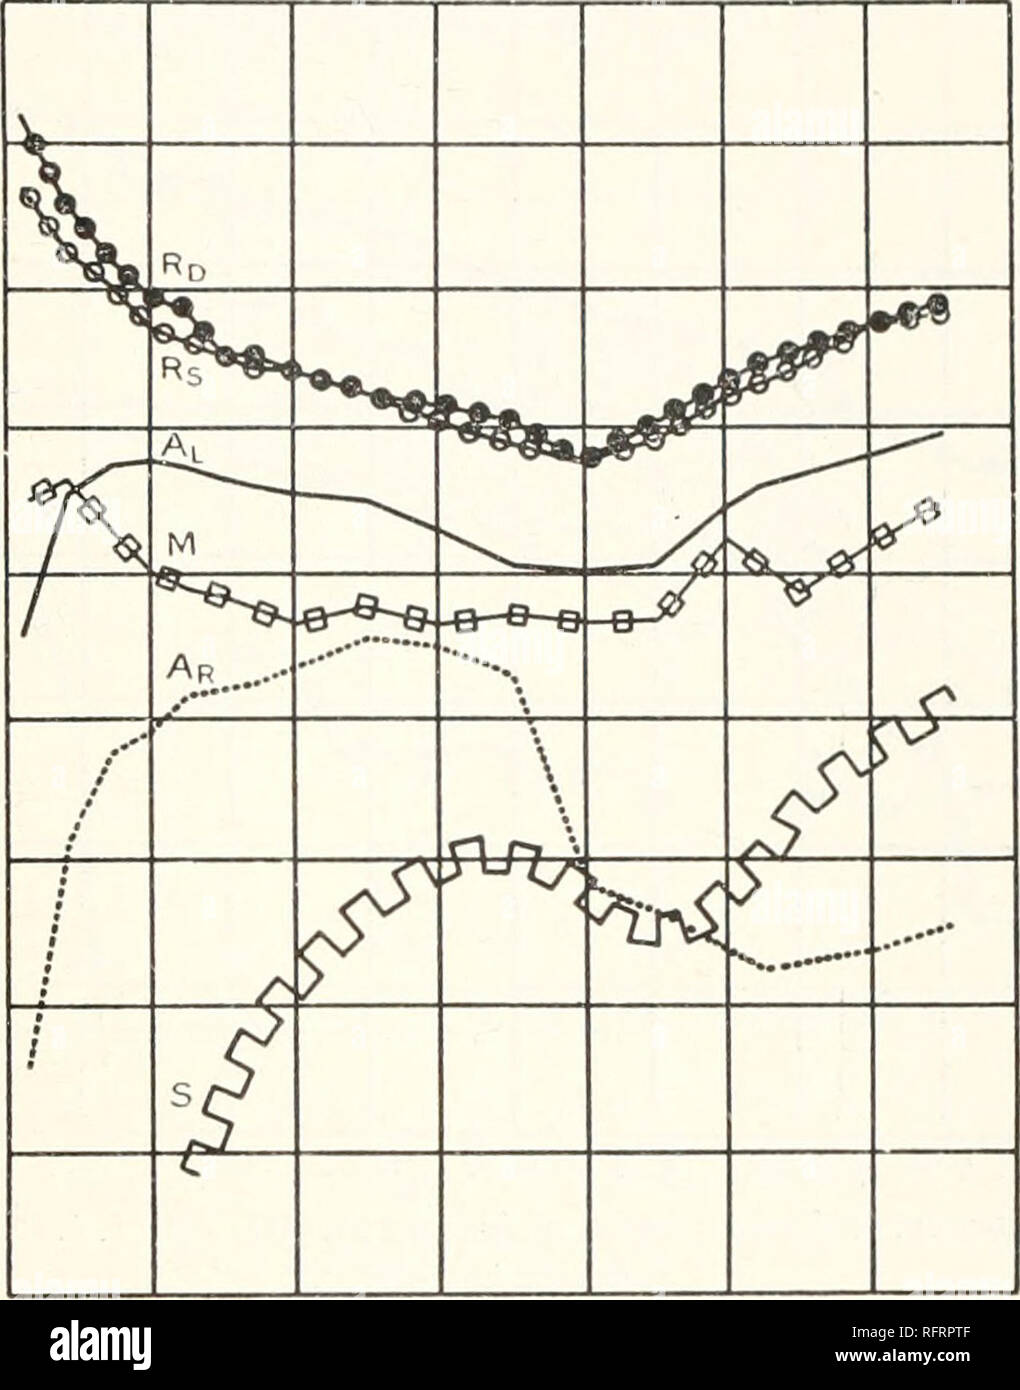 . Carnegie Institution of Washington publication. DISCUSSION OF RESULTS. 57 and between the arms can be readily explained by the difficulty in securing a proper position on account of the discomfort of the subject. It is of interest to note that from 10h 20m a.m. to 11 a.m., the temperature between the arms (curve M) followed almost exactly that of the rectum. The records of the measurement may be found in fig. 27, the designations of the rectal and axillary curves being as usual. The curves for the thermometers between the crossed arms and in the mouth are marked S and M, respectively. 37 2°C Stock Photo